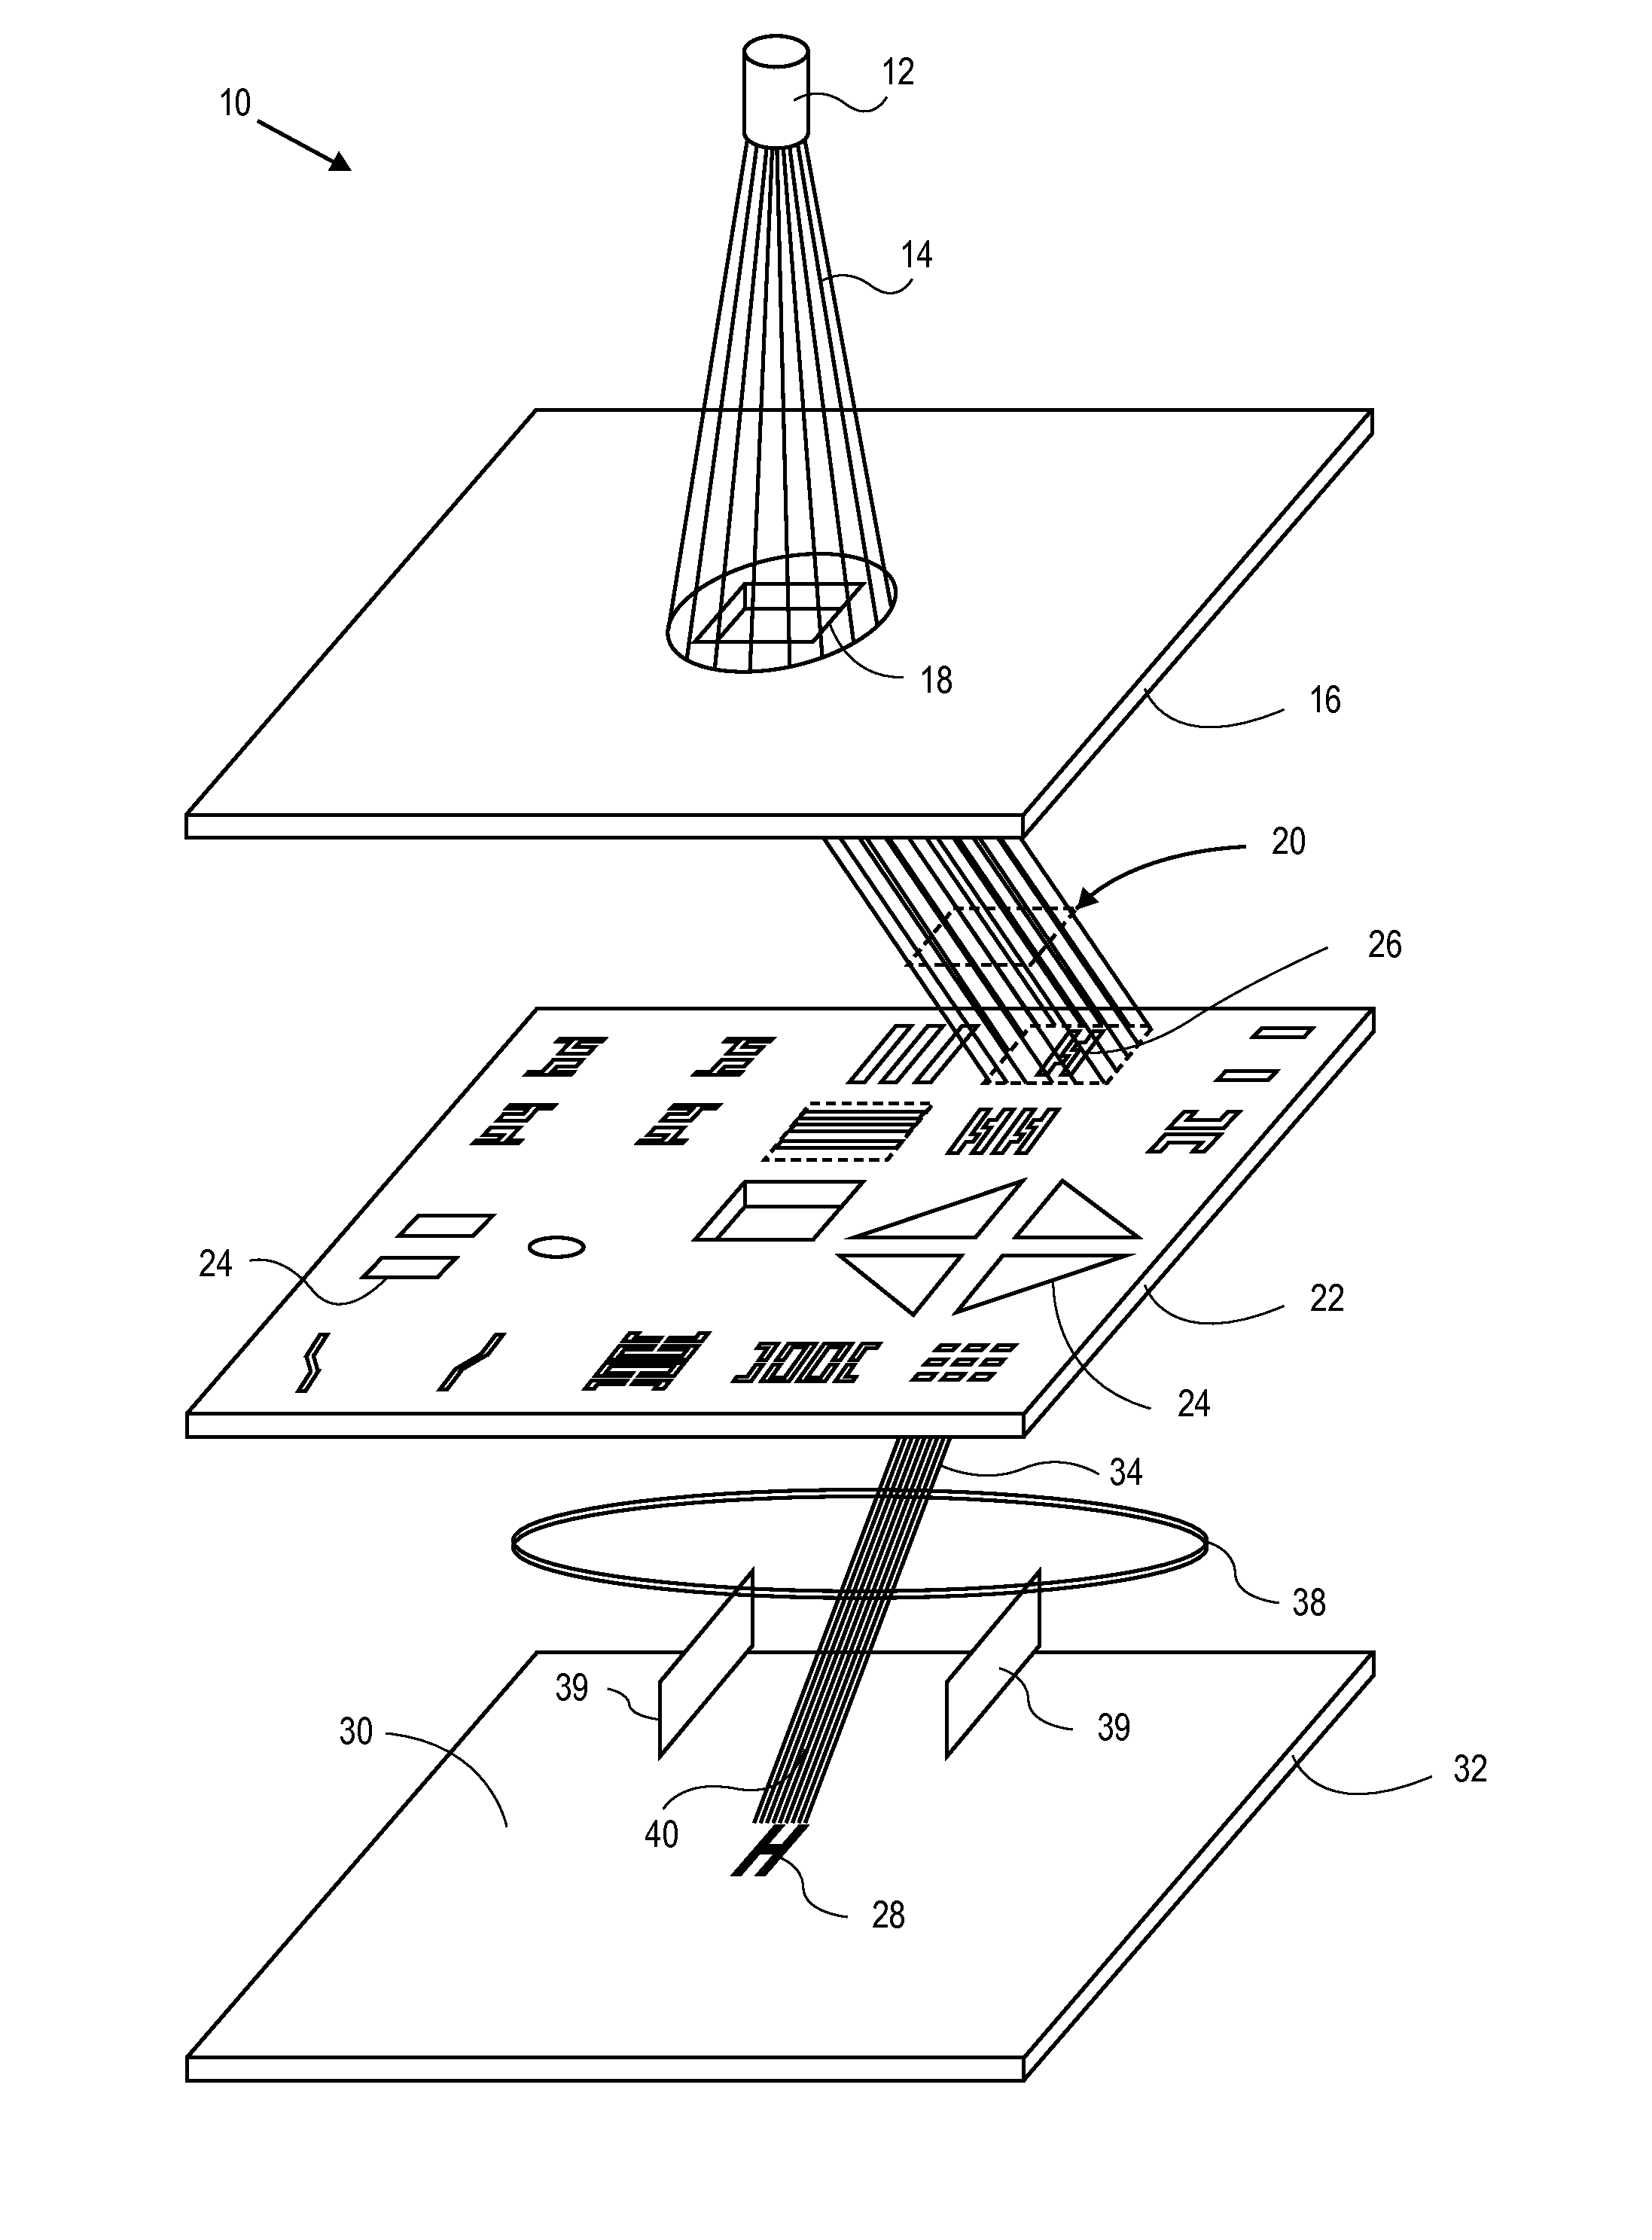 Method and system for manufacturing a surface using character projection lithography with variable magnification